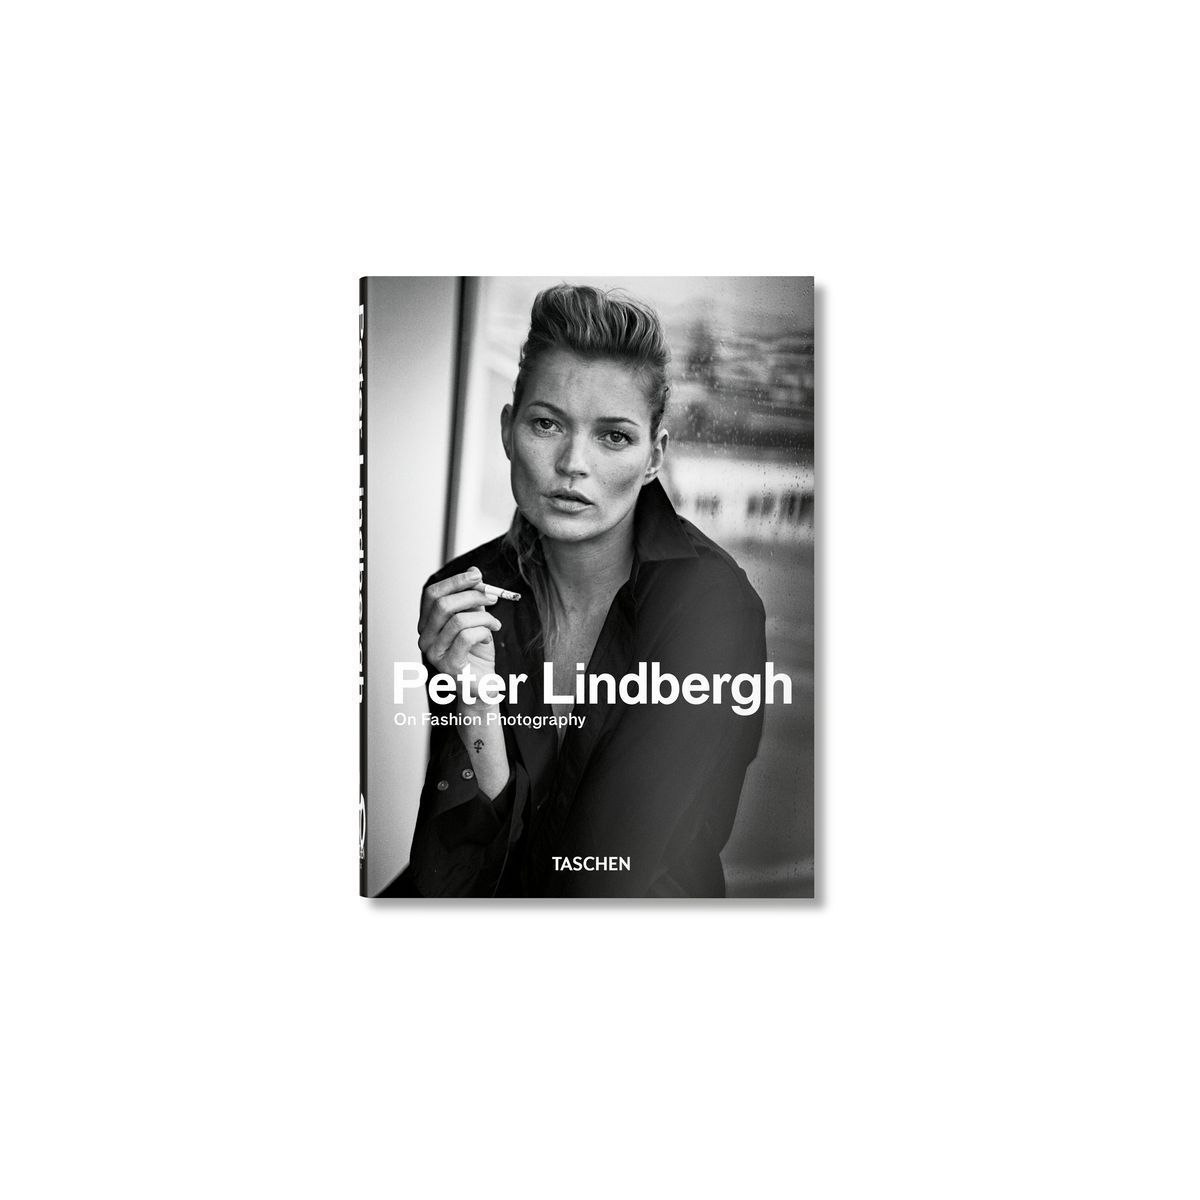 Peter Lindbergh. on Fashion Photography. 40th Ed. - (40th Edition) (Hardcover) | Target